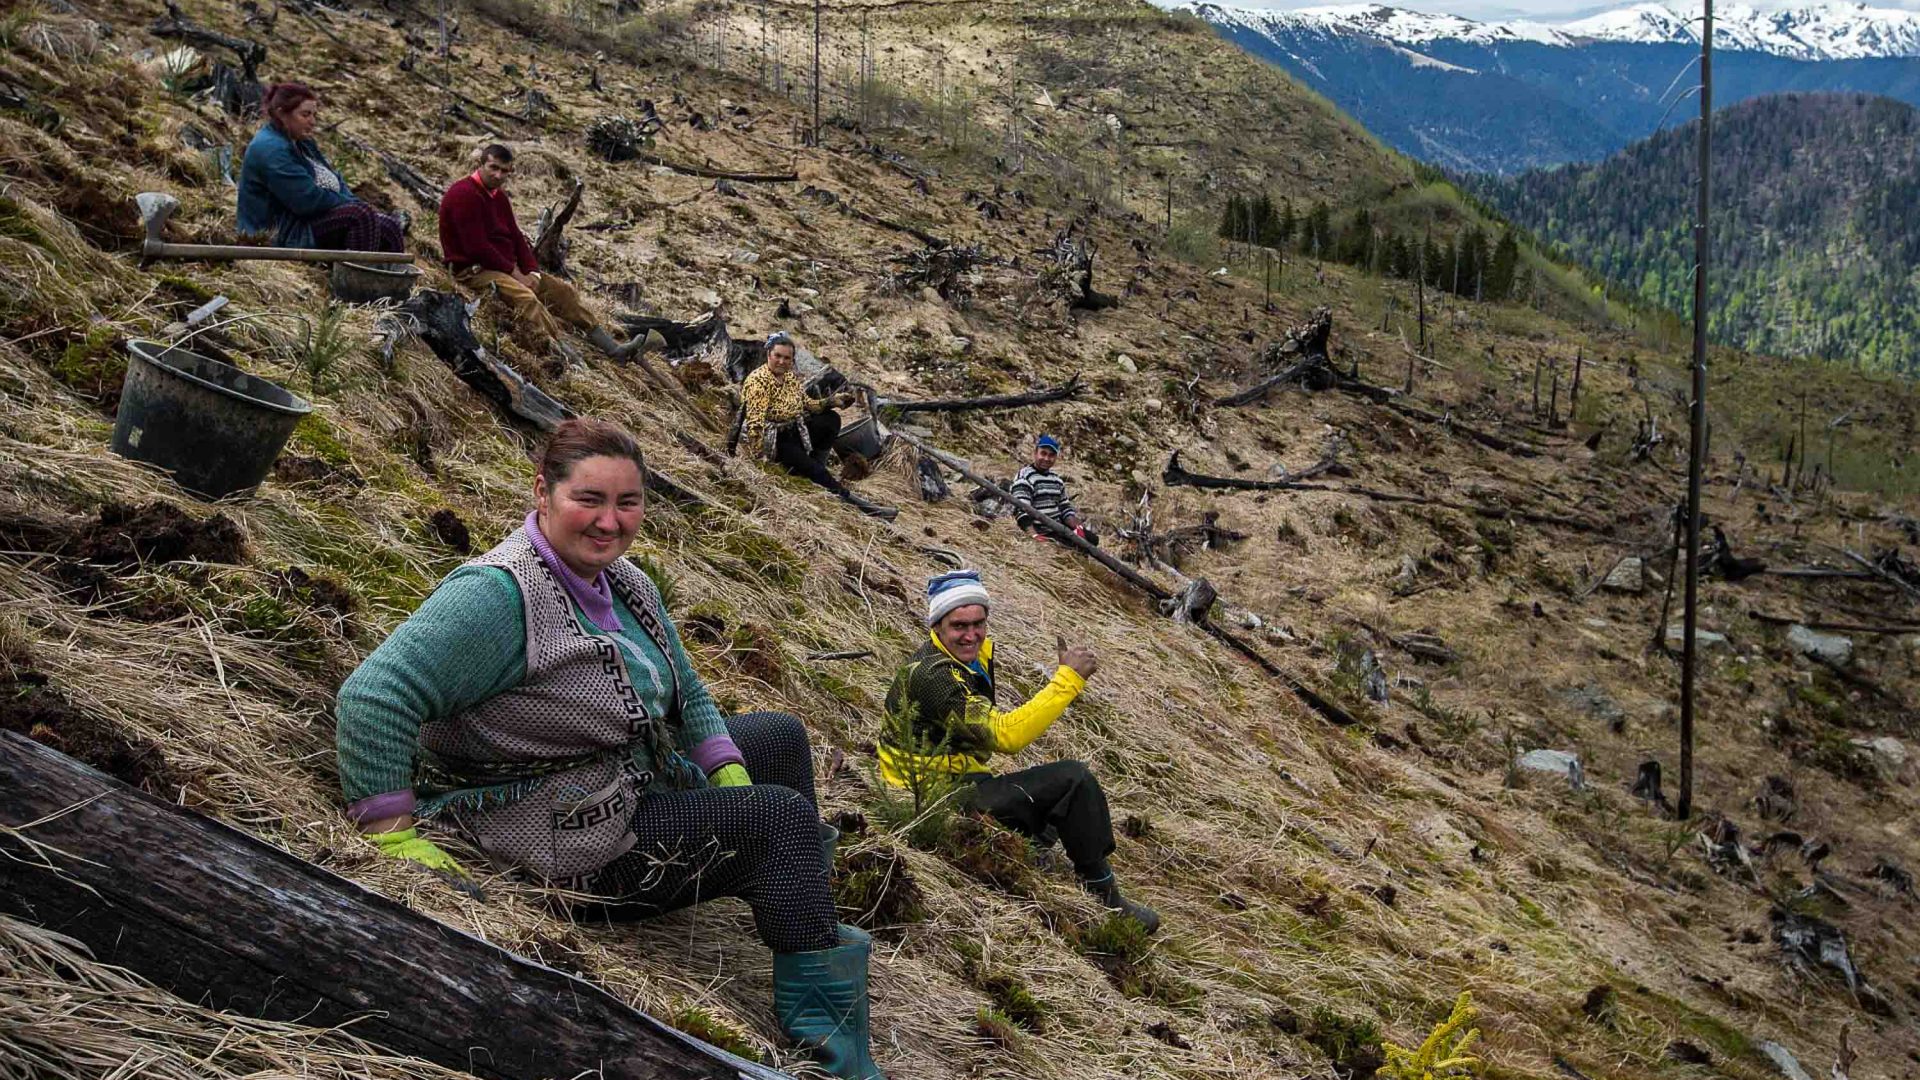 Two workers sat on a mountainside planting trees.